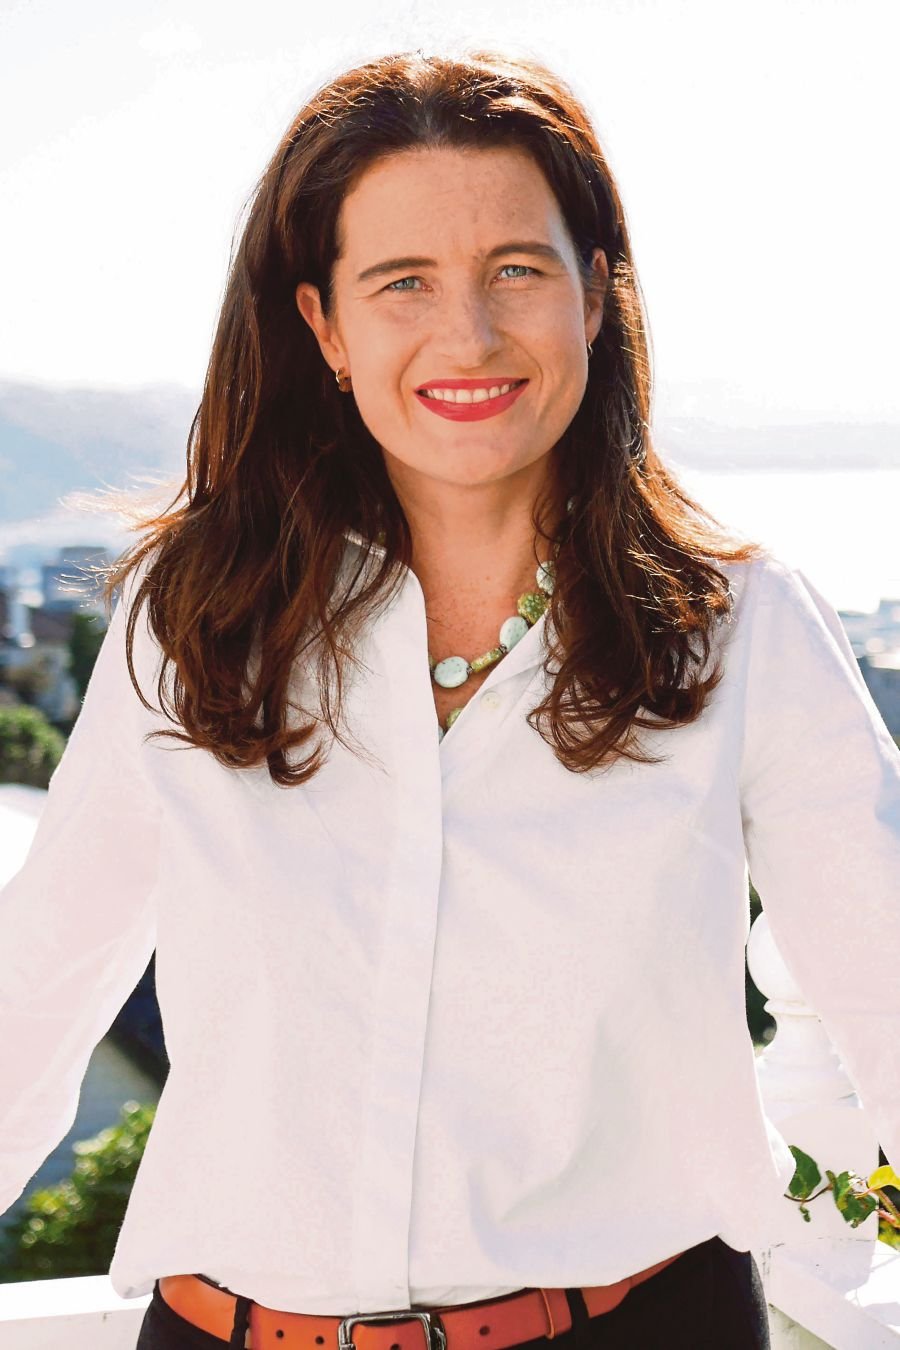 Finance Minister Nicola Willis said that the New Zealand government plans to reduce debt and government spending as a proportion of the overall economy and get back to surplus as part of its budget priorities. — AFP